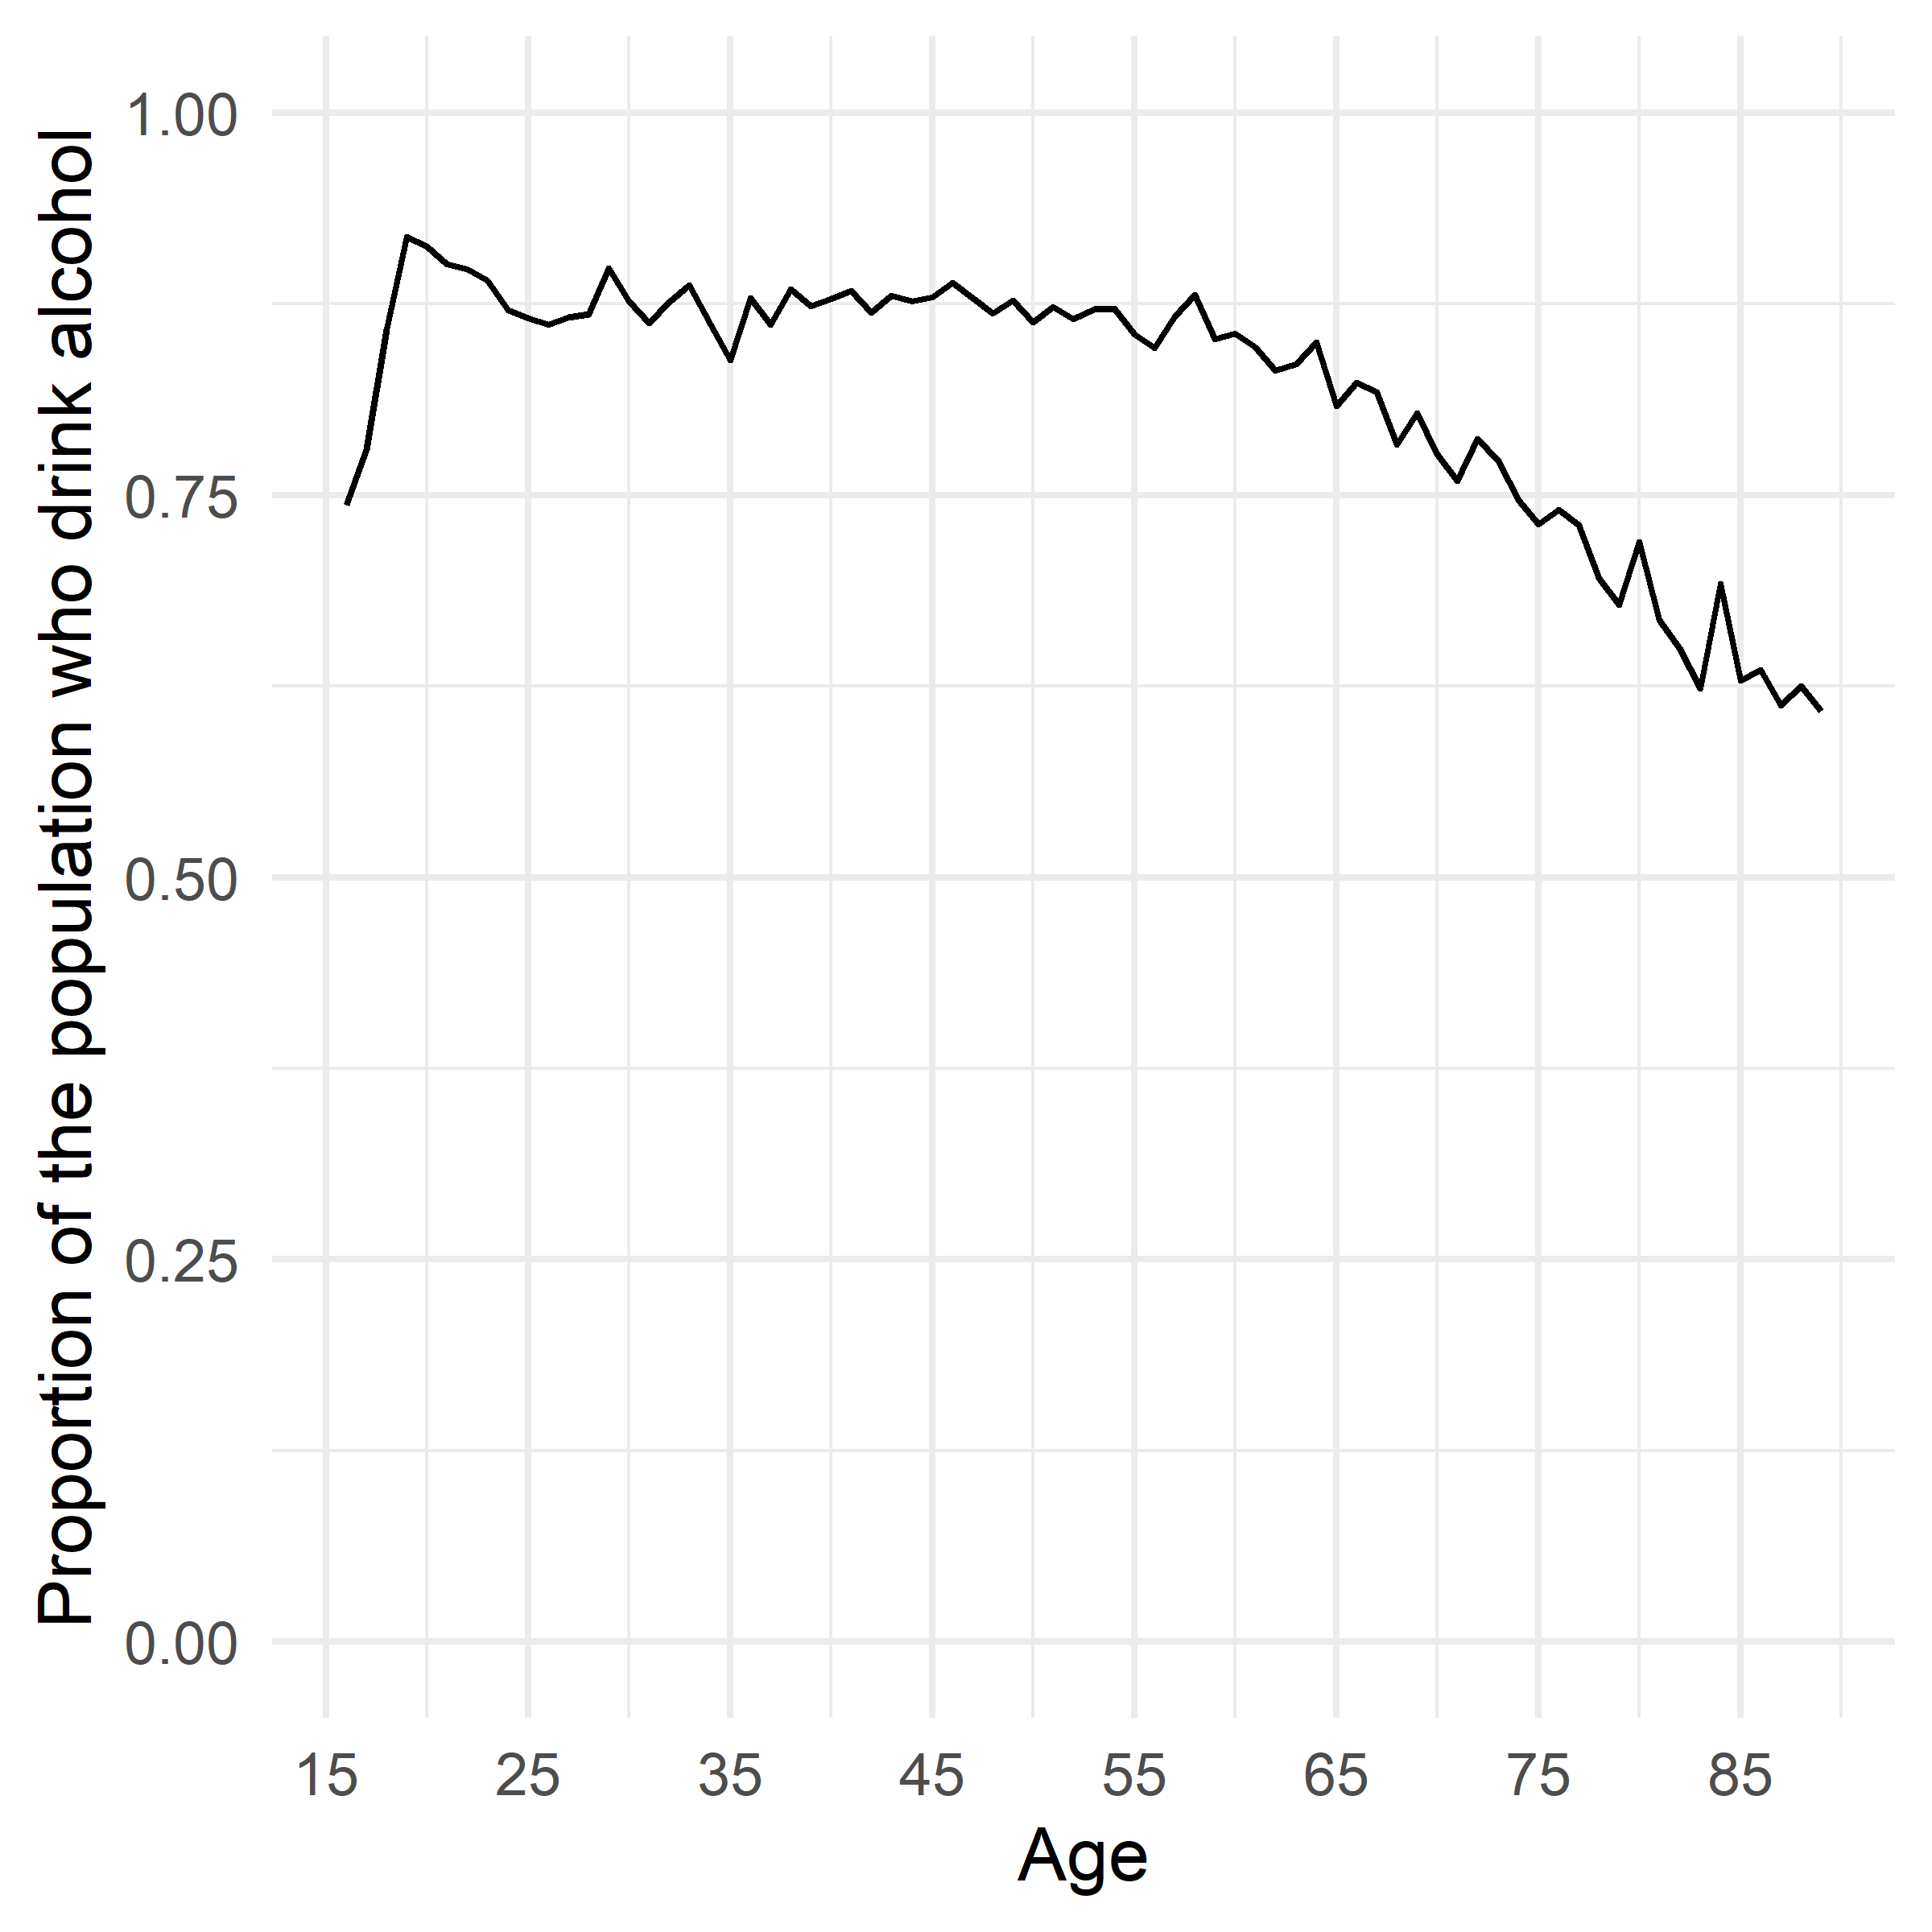 Figure 11. Age trends in the proportion of people who drink alcohol.